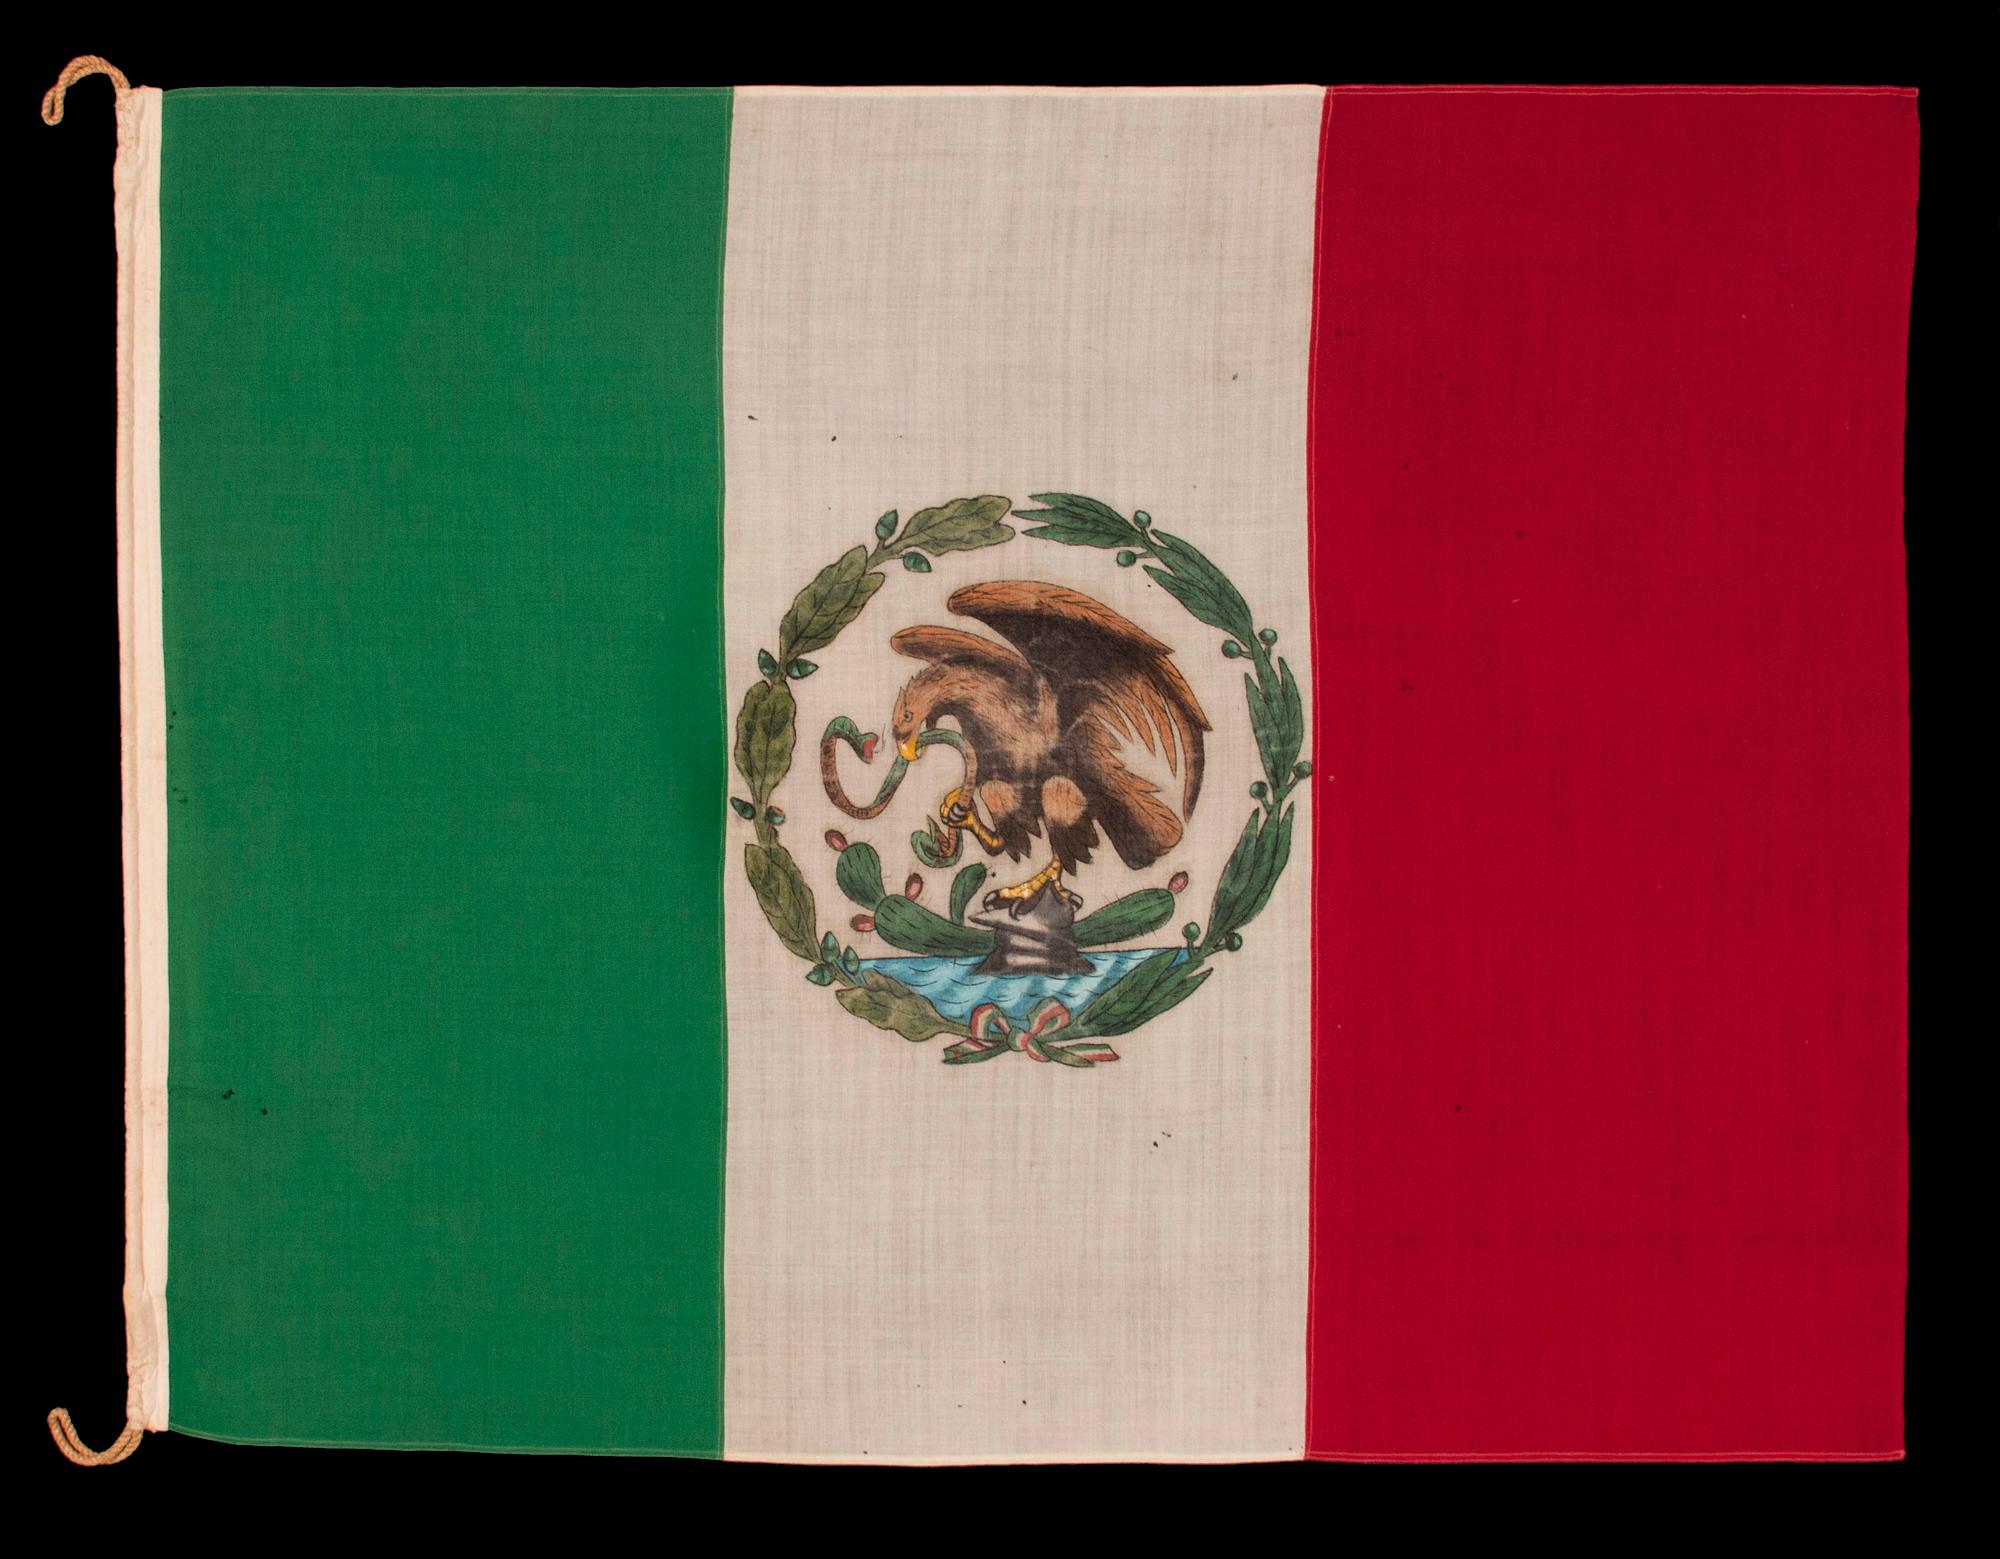 MEXICAN NATIONAL FLAG IN THE DESIGN USED BY REVOLUTIONARIES FROM 1917 - 1934, THE FIRST PERIOD IN WHICH THE EAGLE WAS ILLUSTRATED IN SIDE VIEW; MADE OF GABARDINE WOOL AND WOOL BUNTING, WITH RICH COLORS AND A HAND-PAINTED DEVICE, USED IN THE LATTER